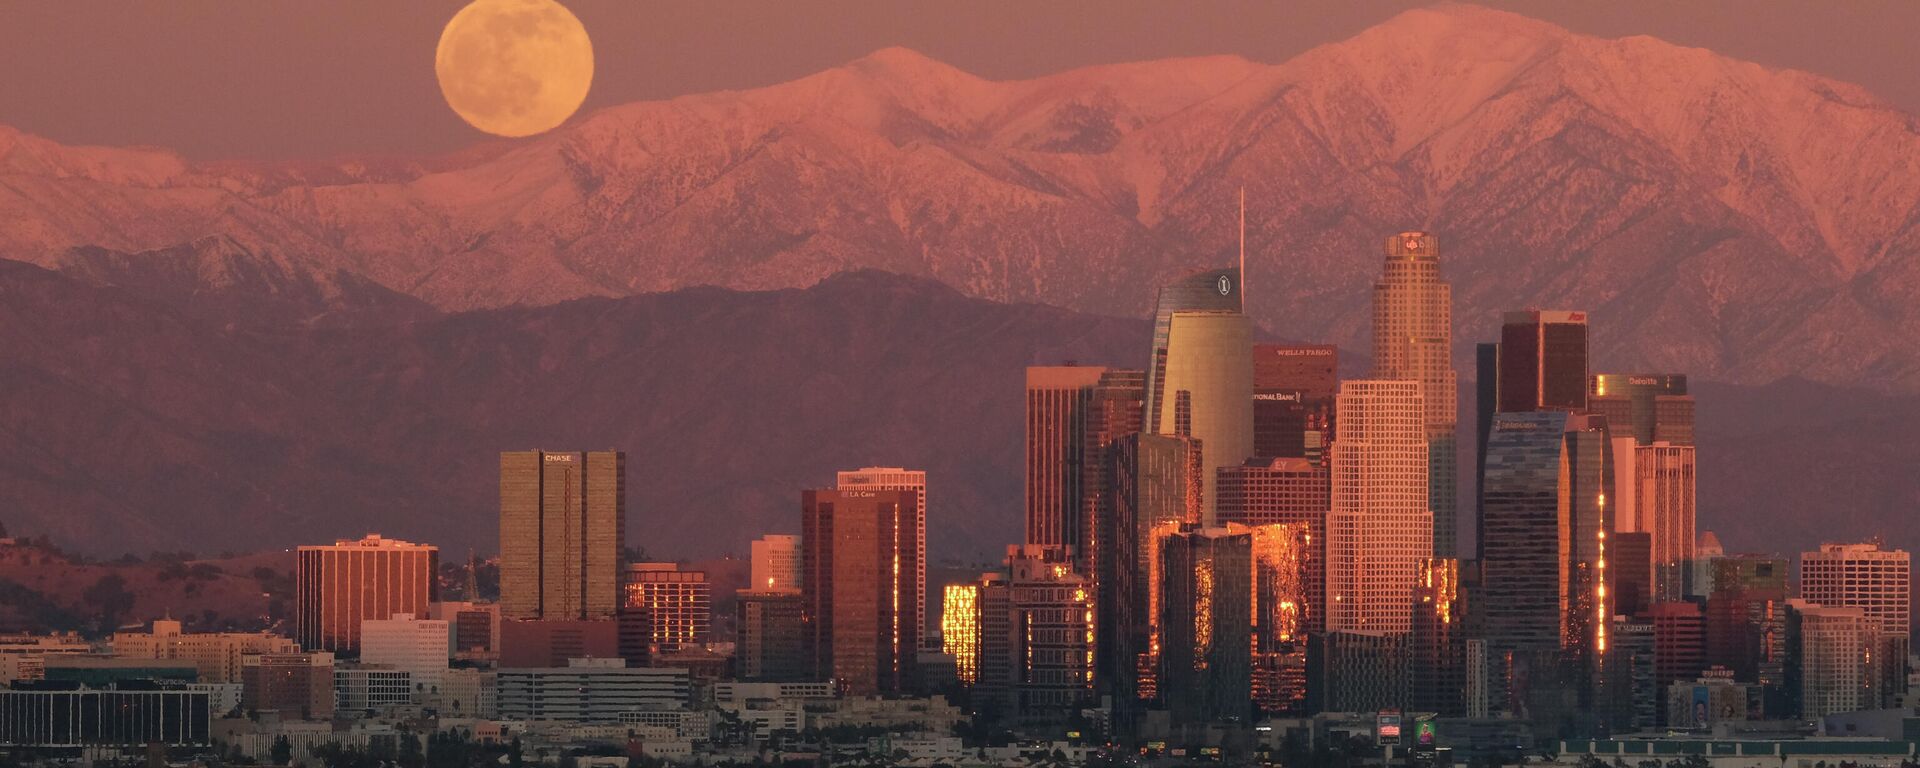 The full moon rises over snow covered mountains, behind the downtown Los Angeles skyline is seen from Kenneth Hahn State Recreation Area Tuesday, Dec. 29, 2020, in Los Angeles. - Sputnik International, 1920, 28.03.2022